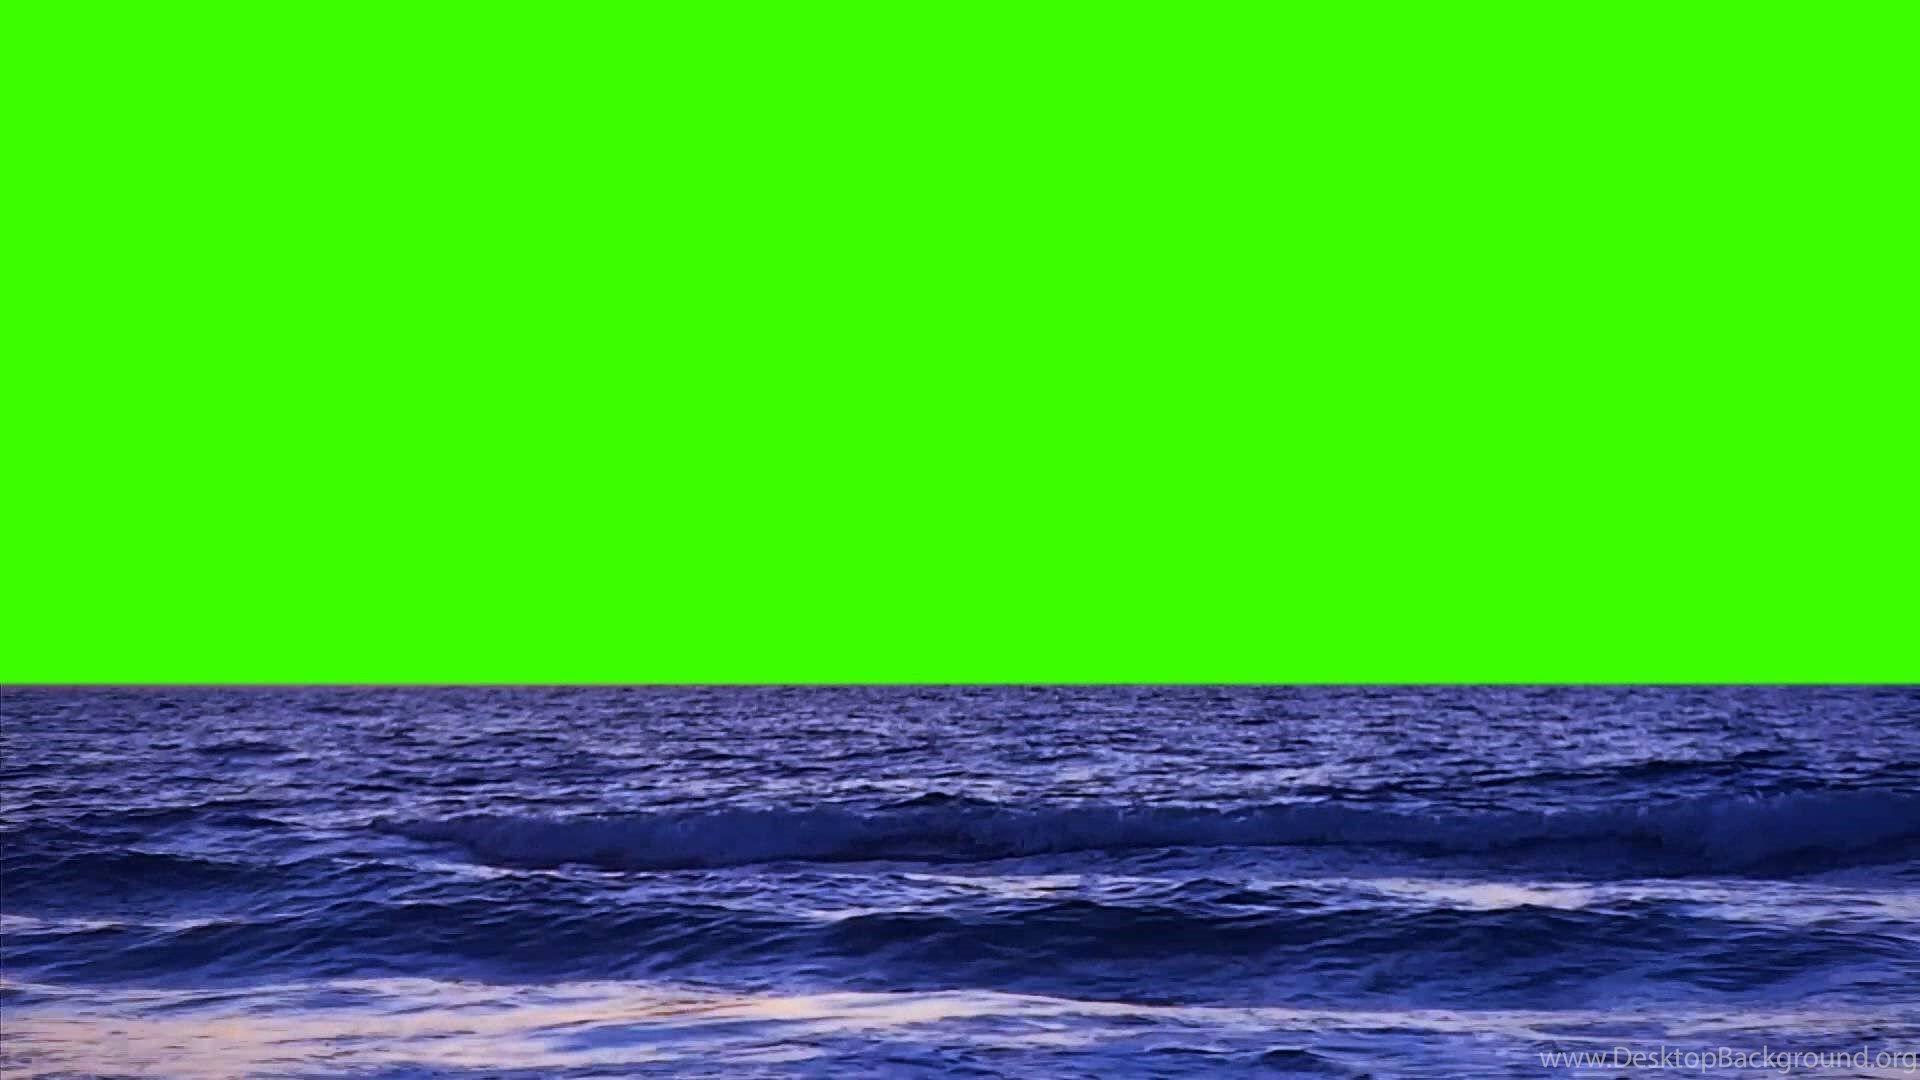 The Sea On A Green Screen Background Royalty Free Footage YouTube